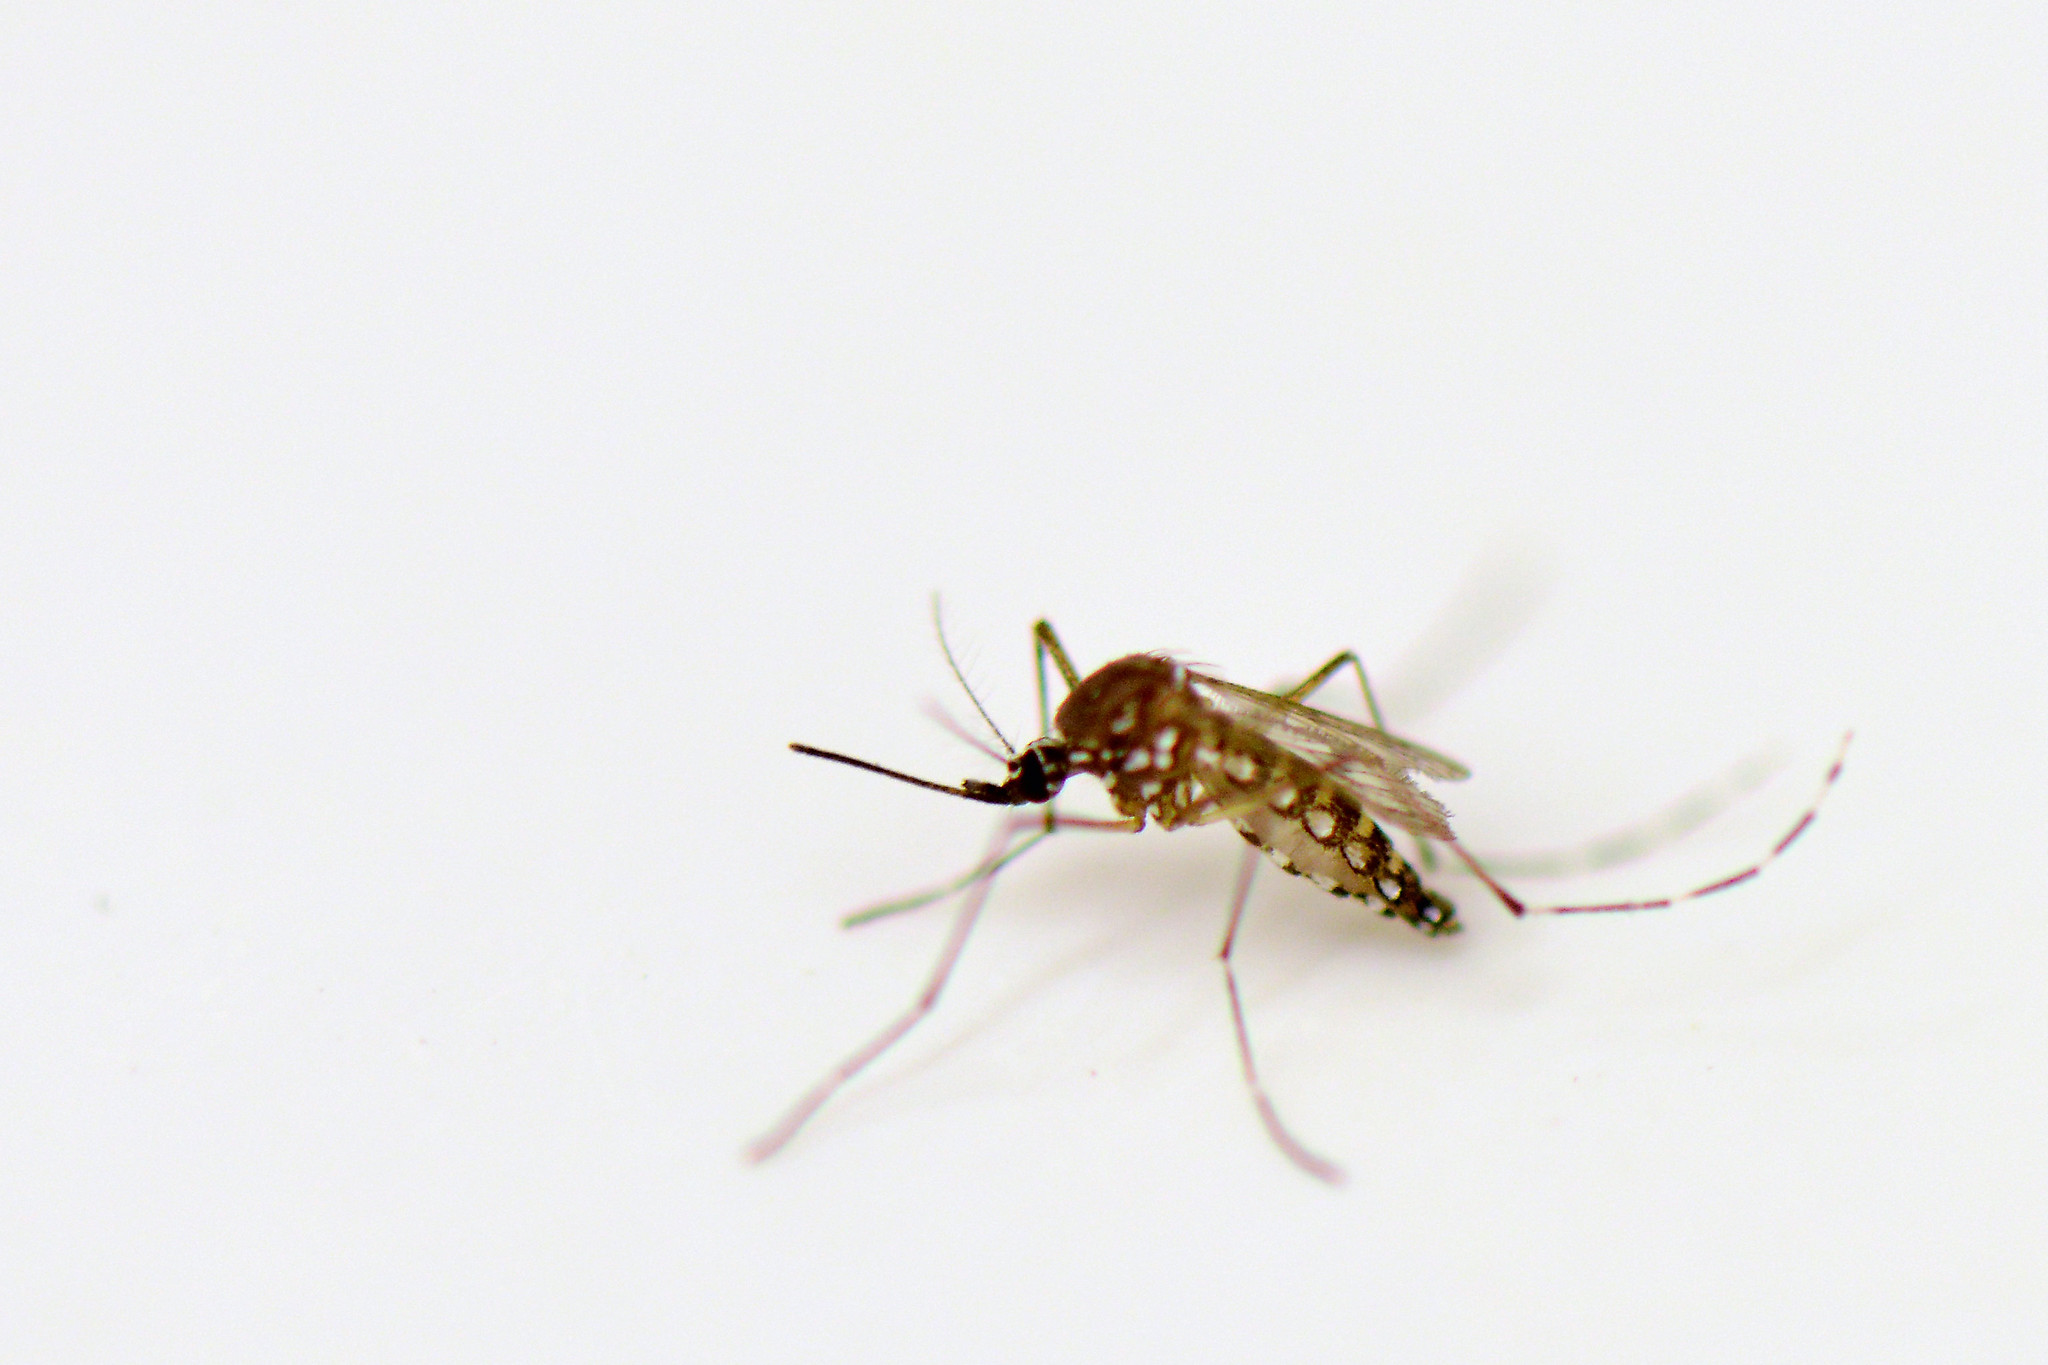 A close-up of an aedes aegypti mosquito, dark brown with white spots.